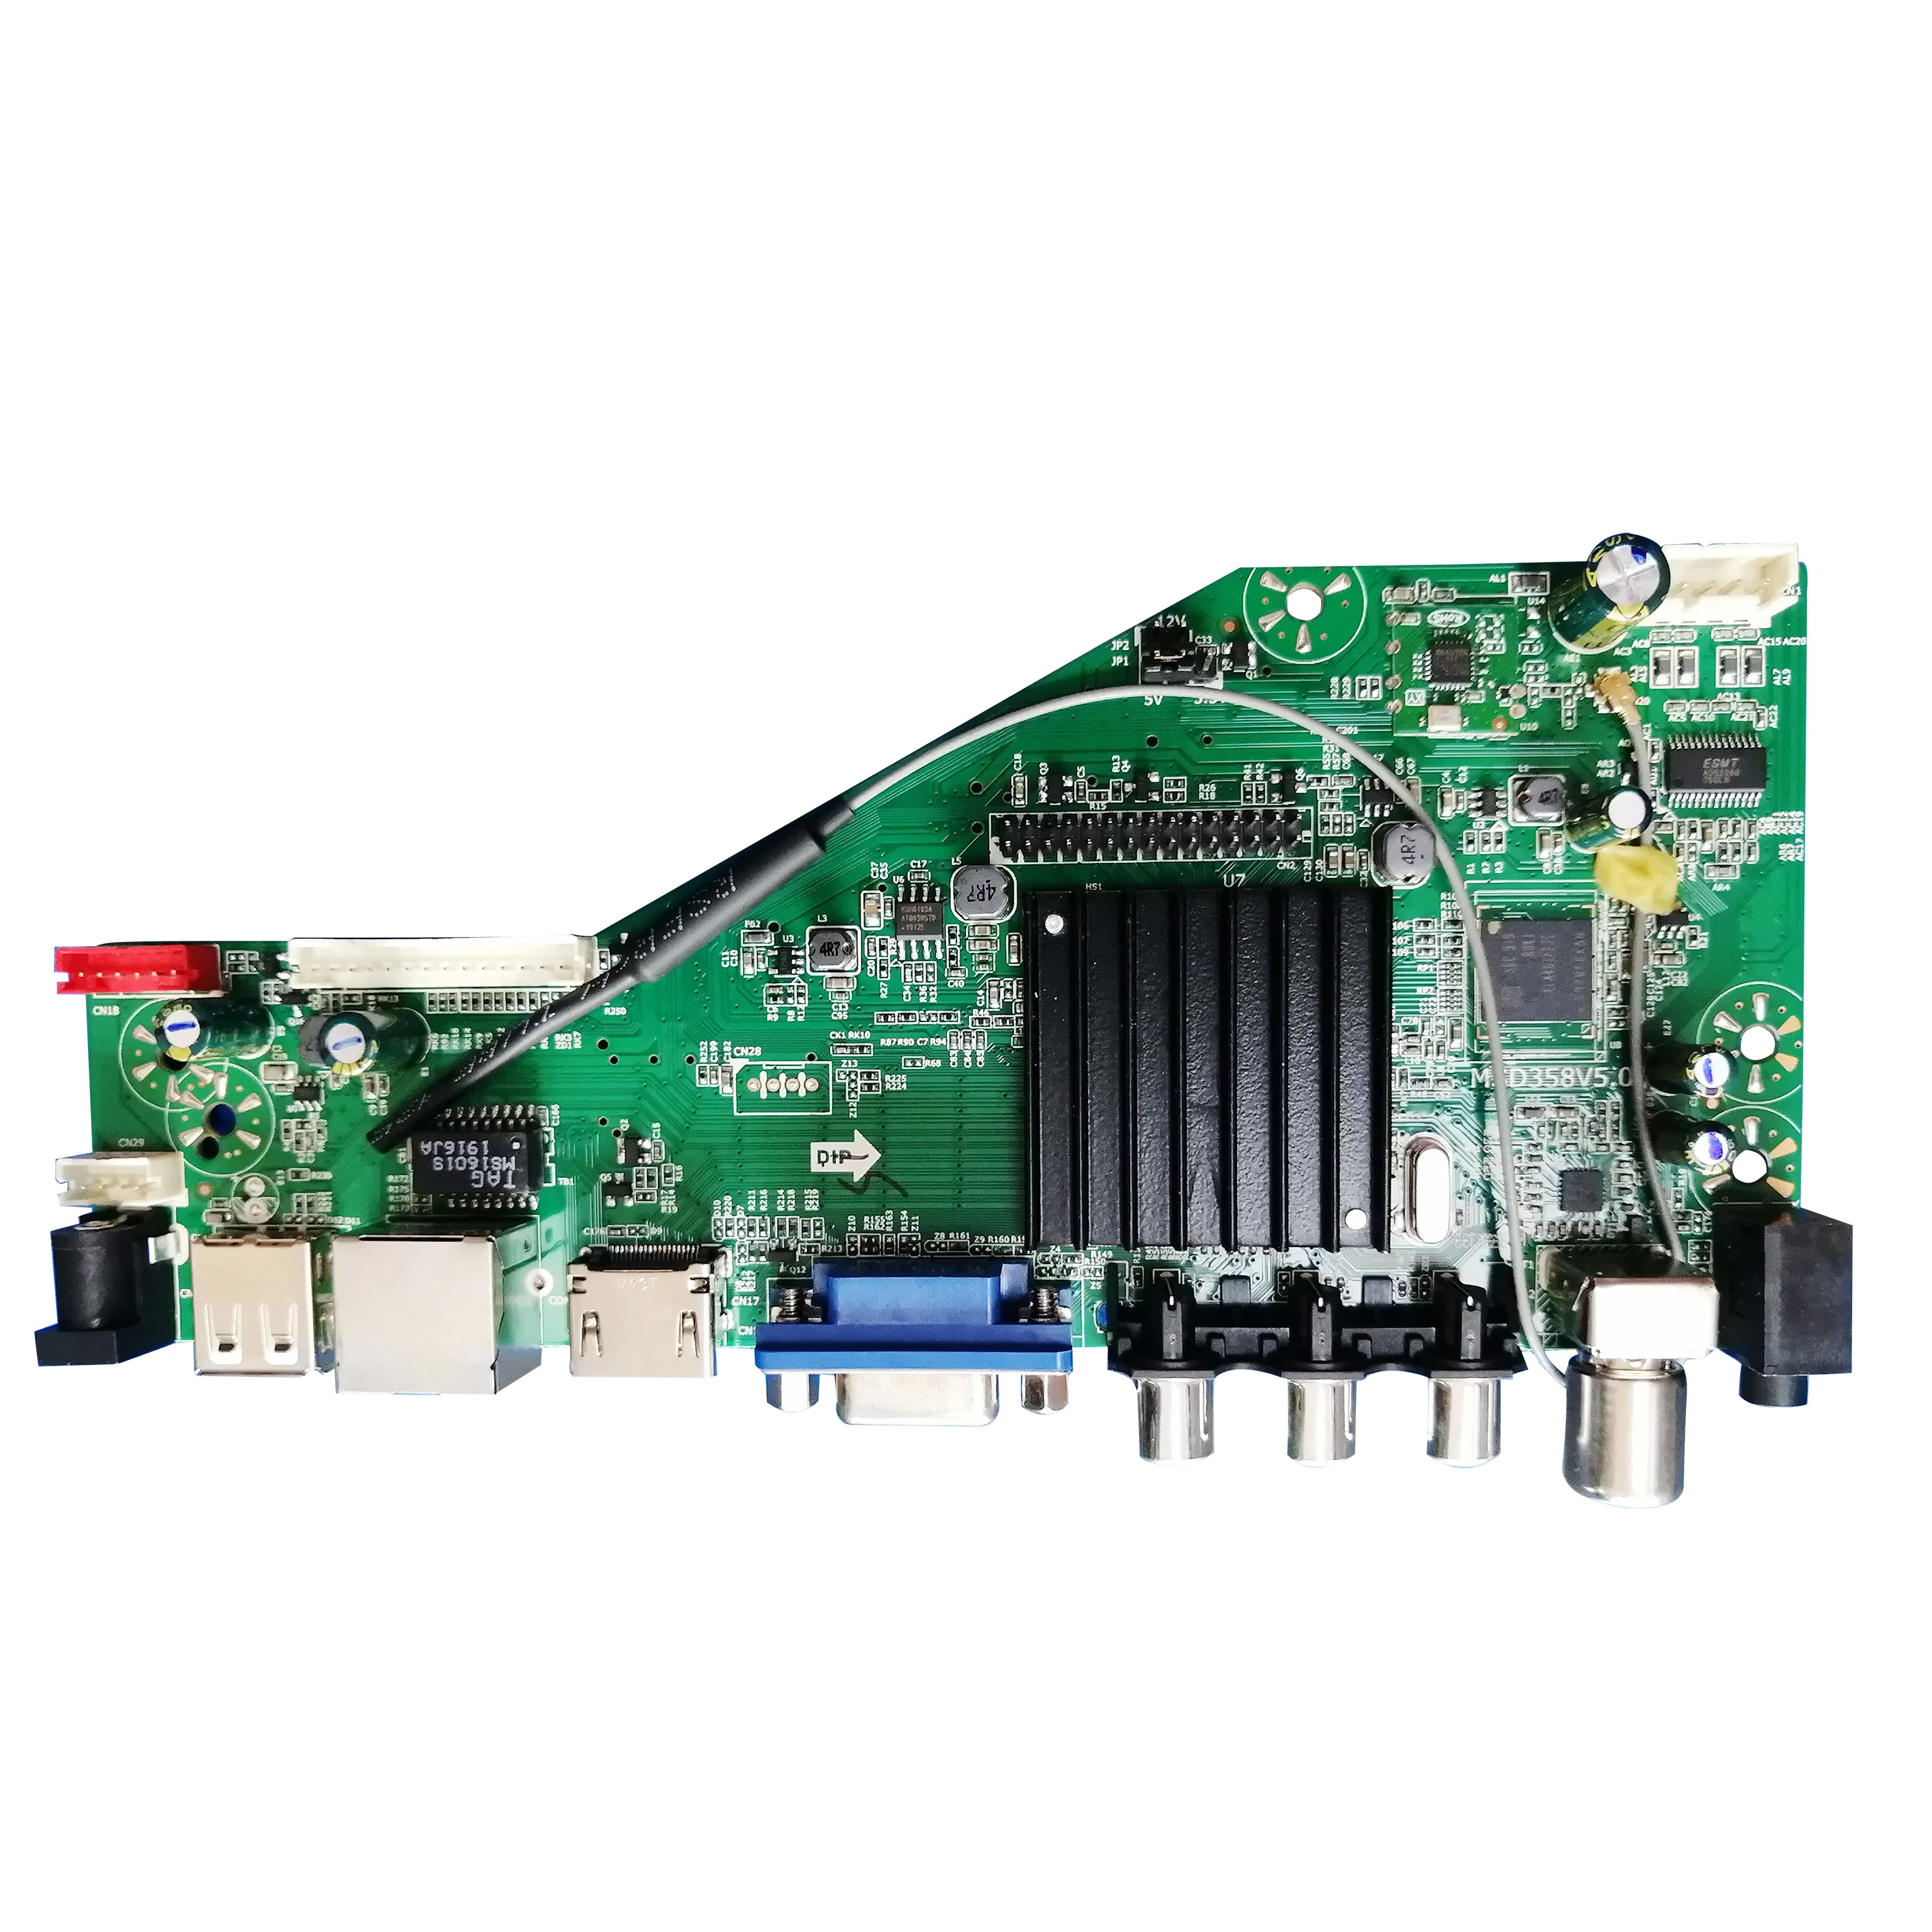 MSD358V5.0 Android 4.4 1G+4G 4 Cores Intelligent Wireless Network TV Driver Board Universal LCD Motherboard WI-FI 3.3/5/12V